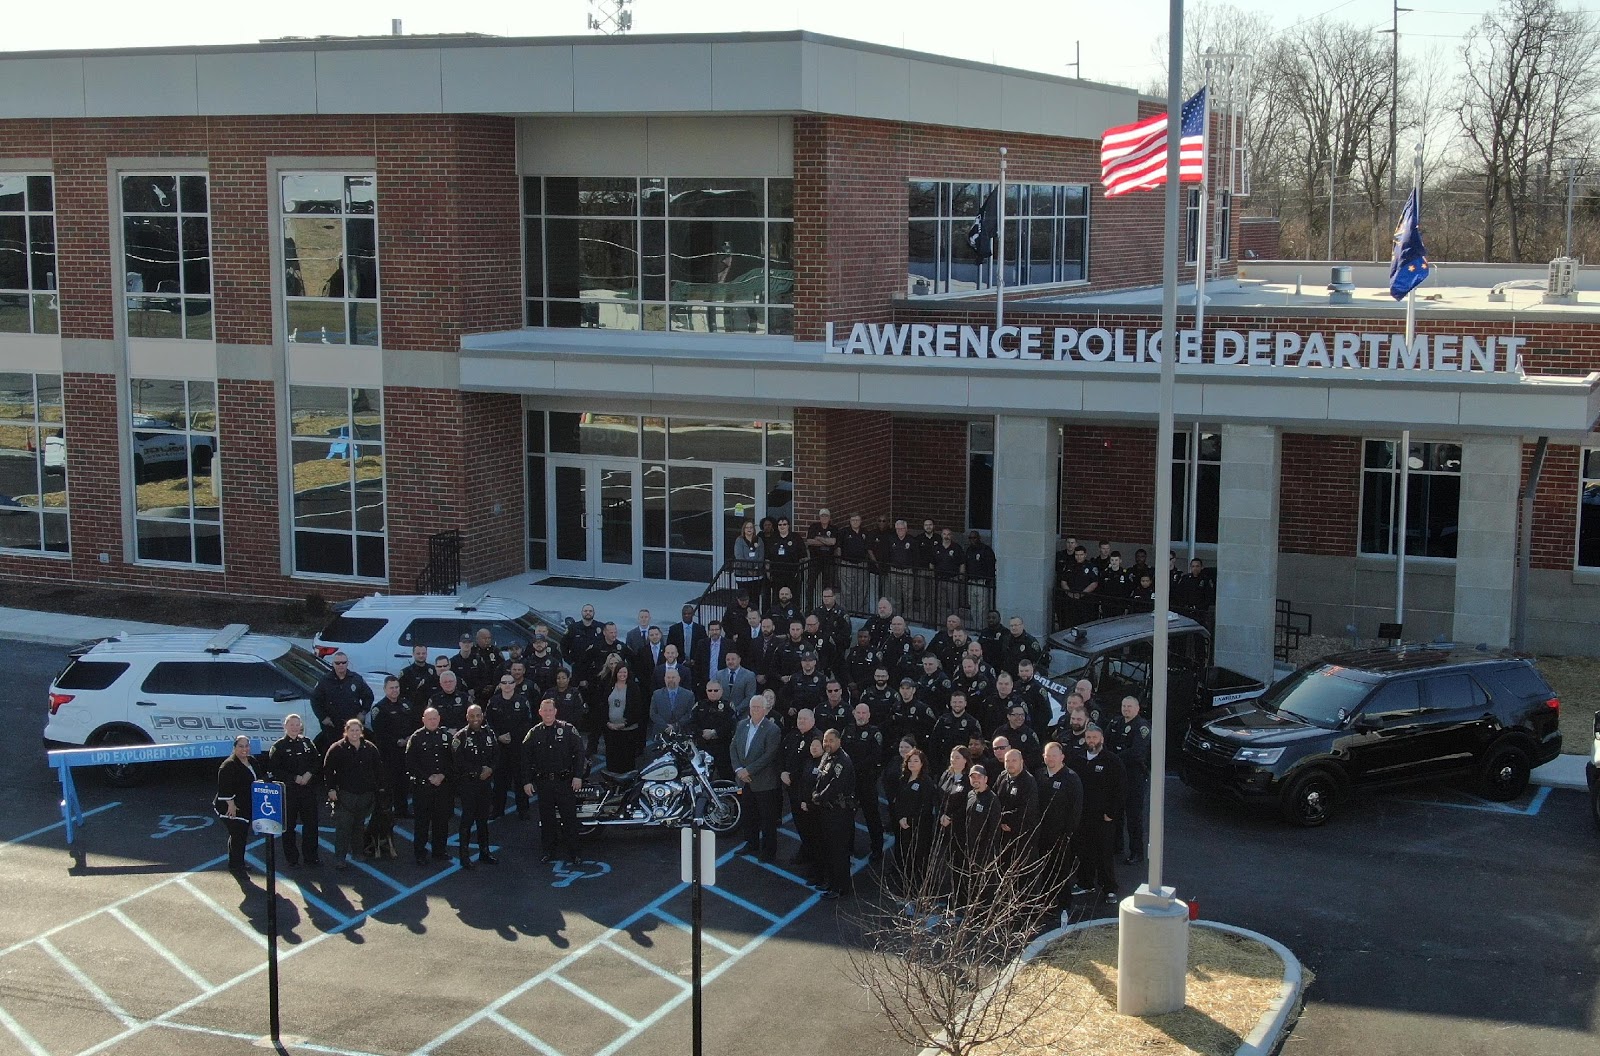 The Lawrence Police Department